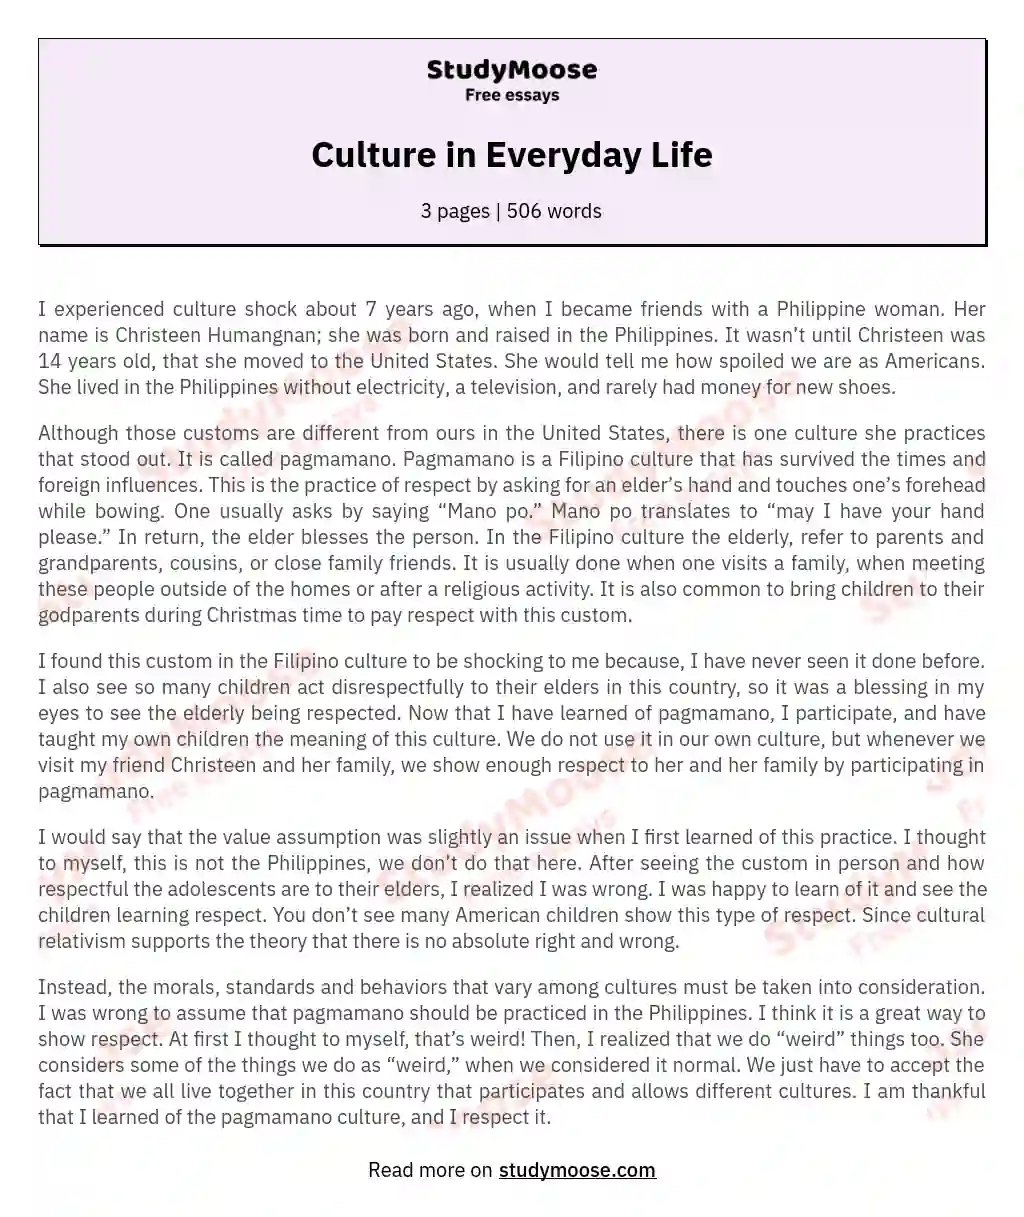 Culture in Everyday Life